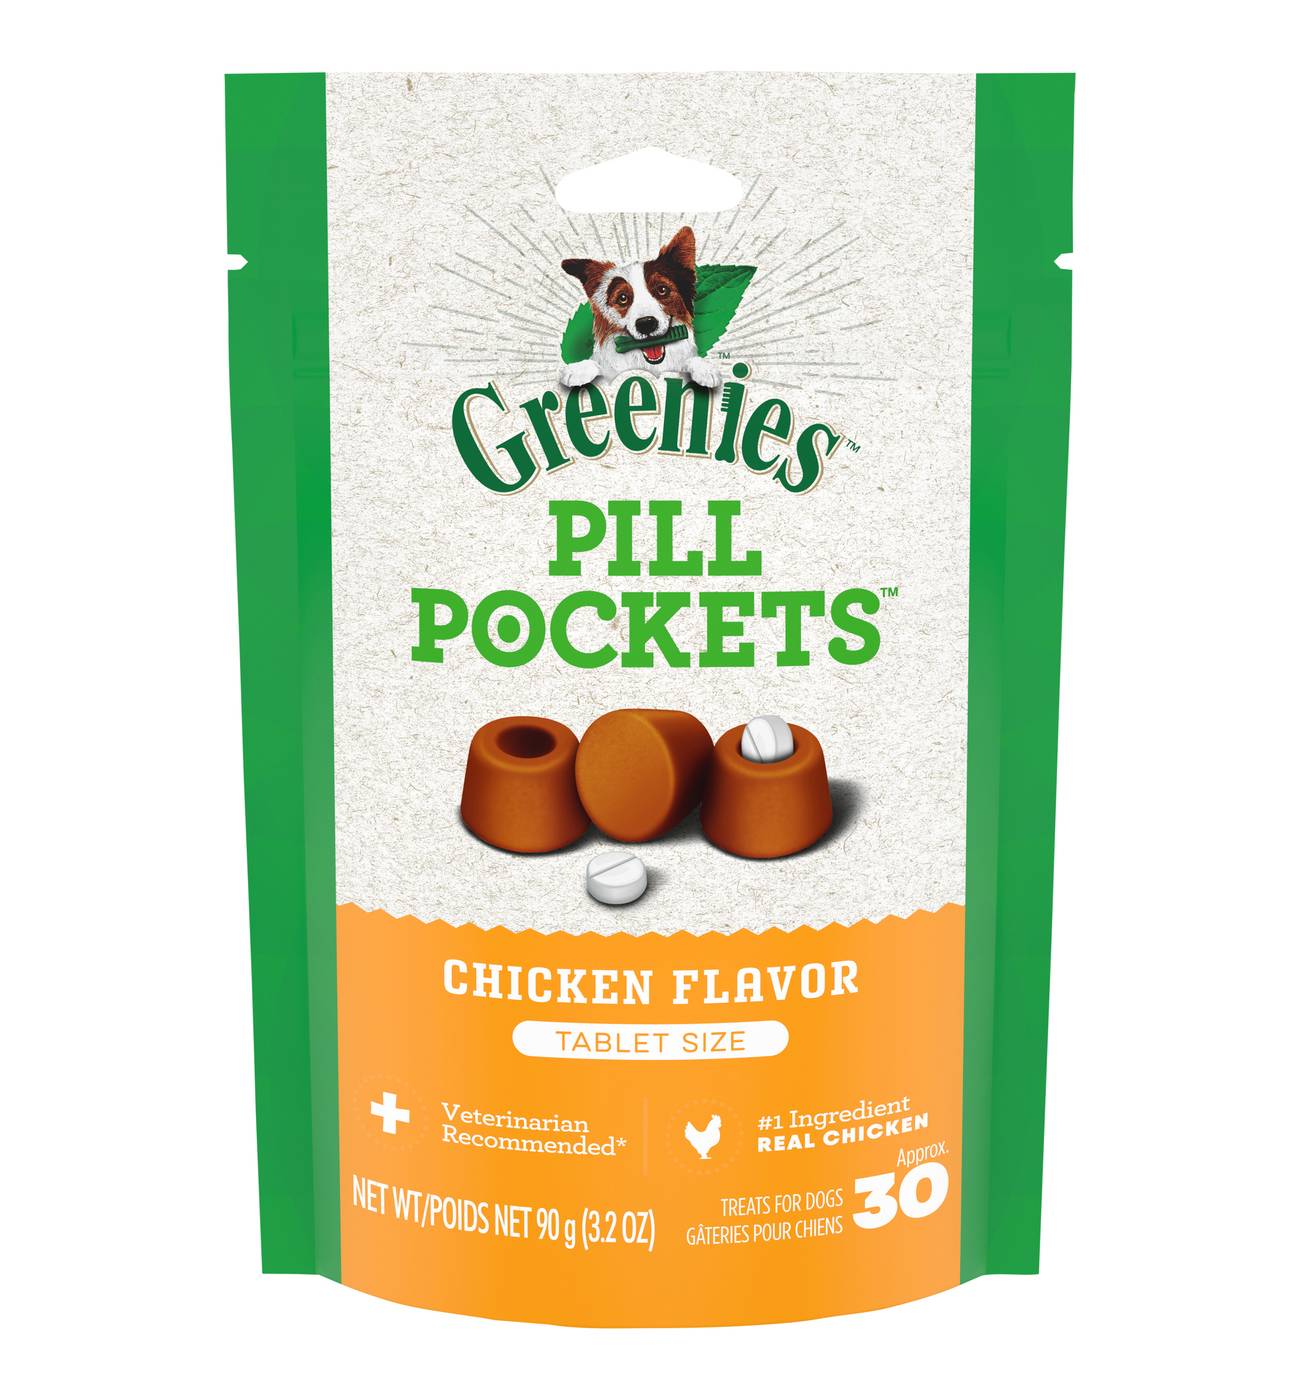 GREENIES PILL POCKETS for Dogs Tablet Size - Chicken Flavor; image 1 of 5